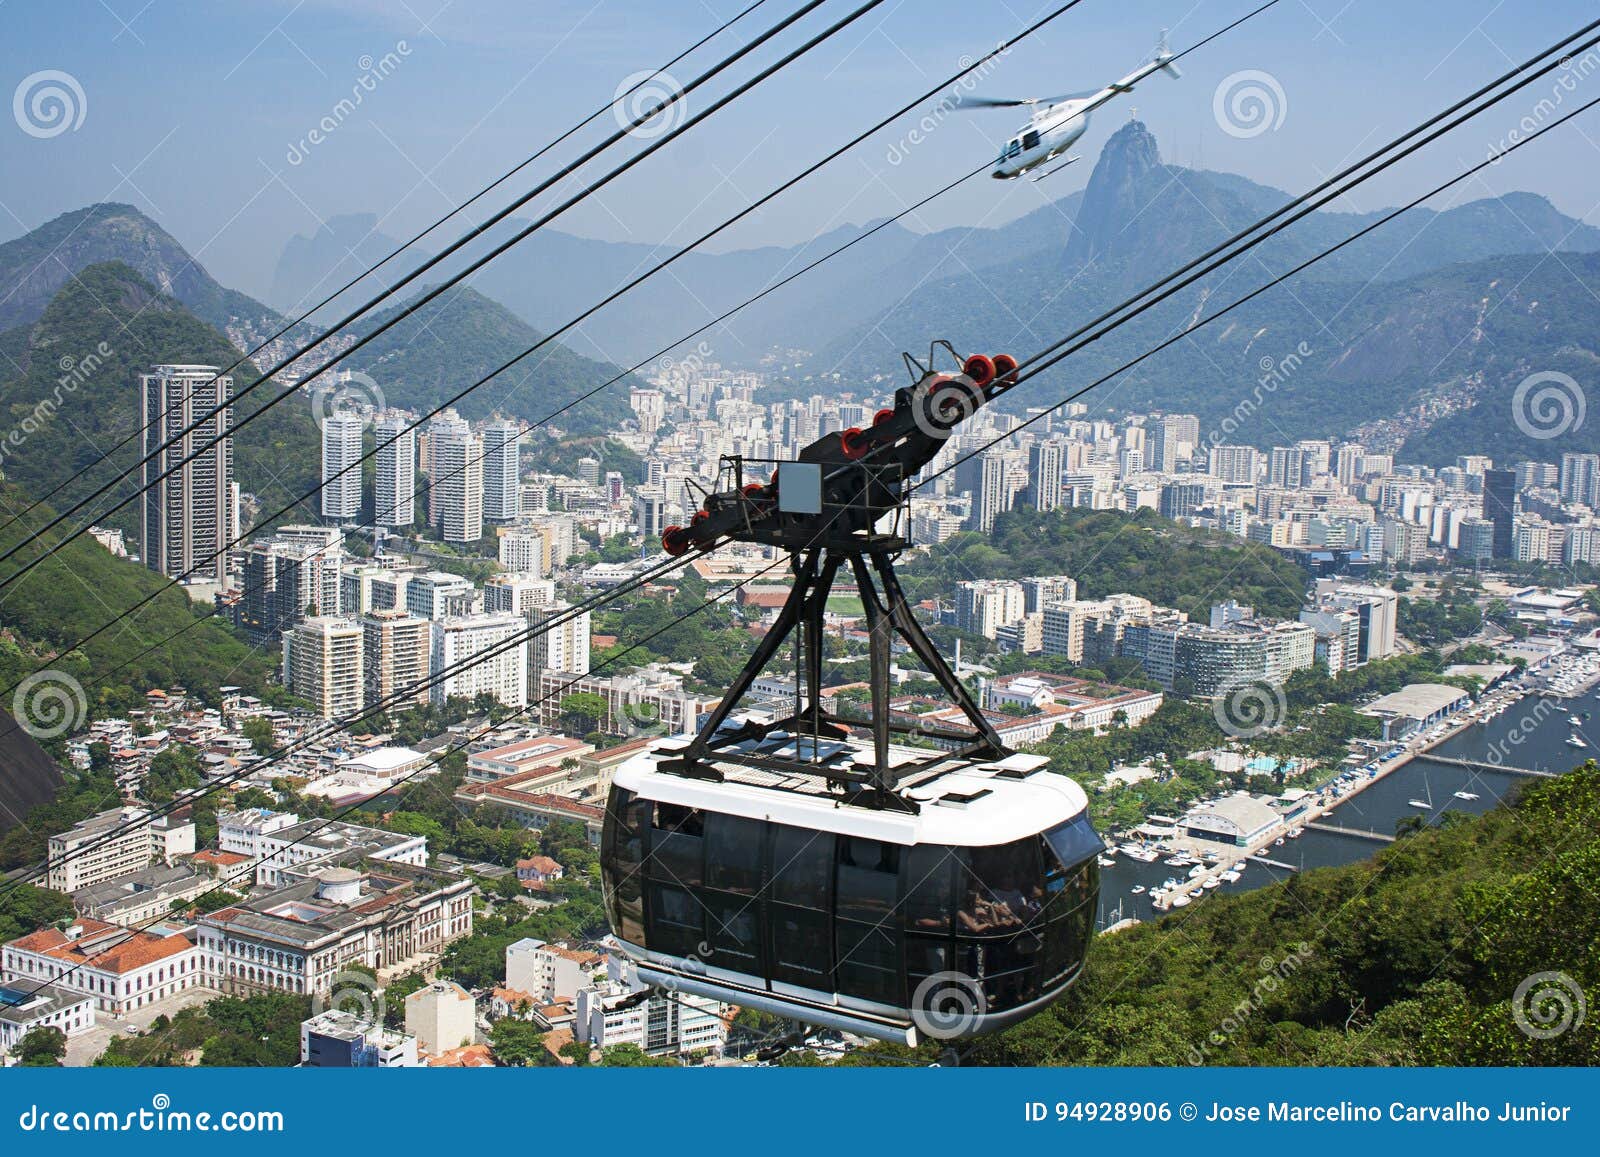 cable car to pÃÂ£o de aÃÂ§ucar